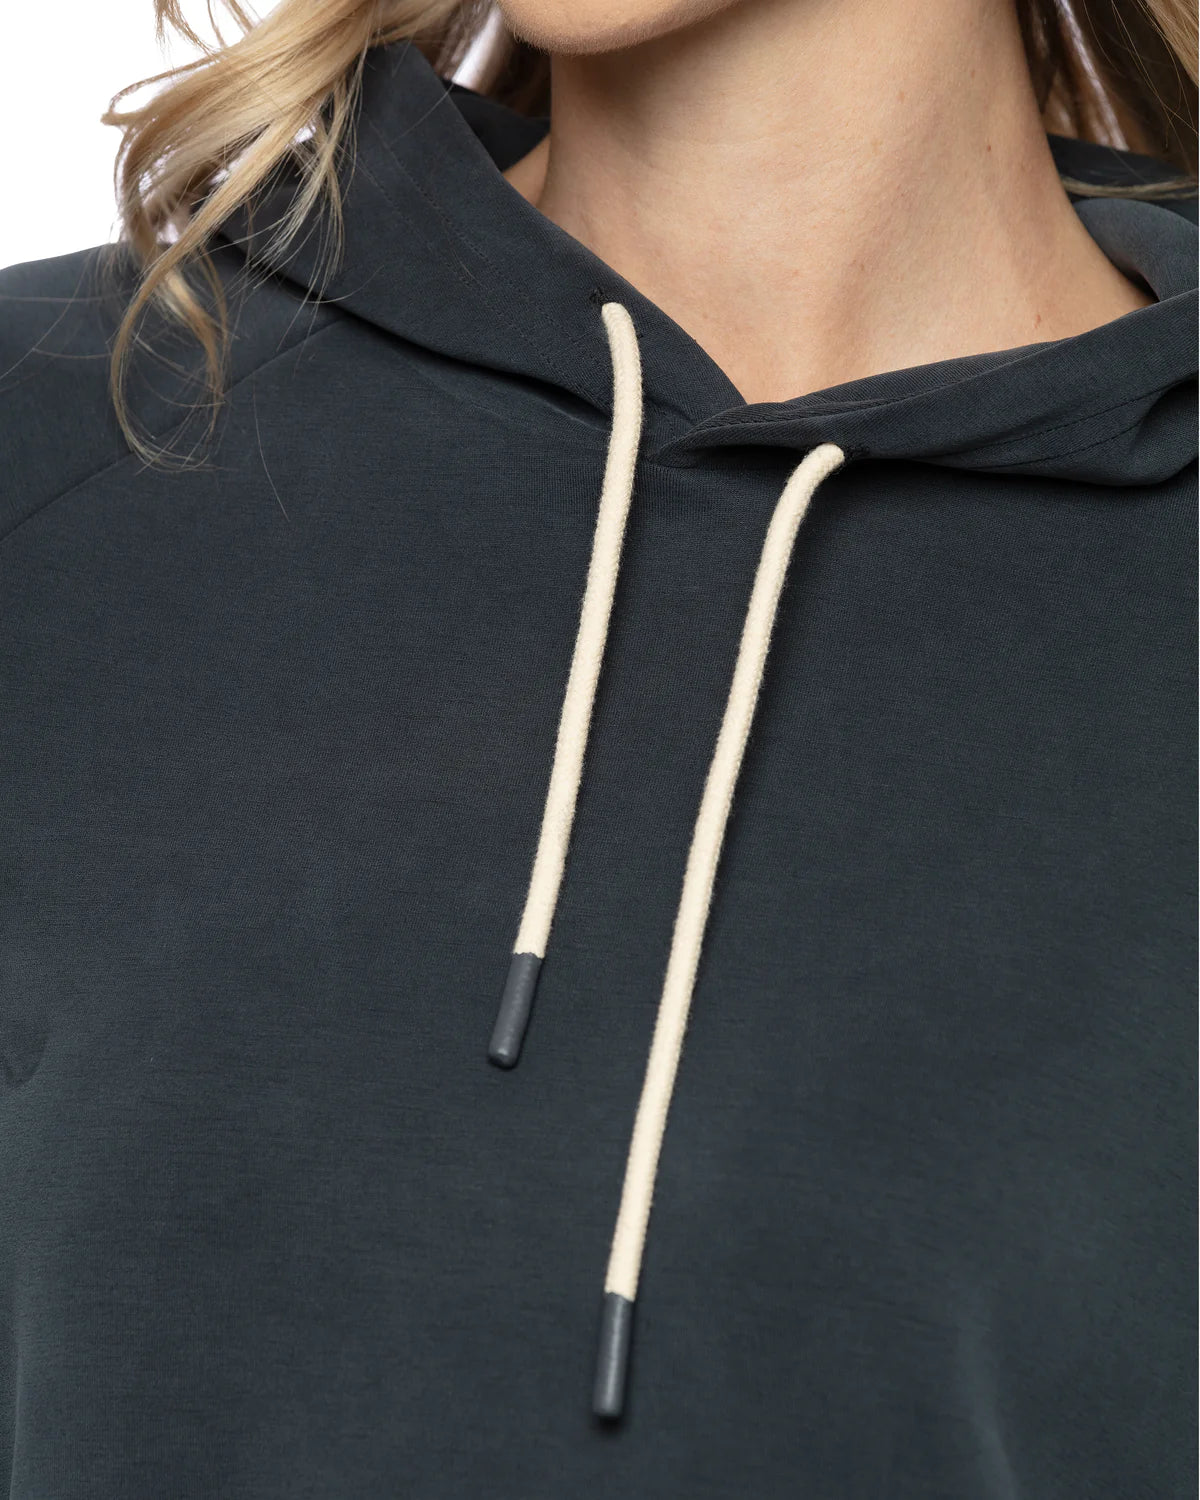 Women's Later On Pullover Hoodie